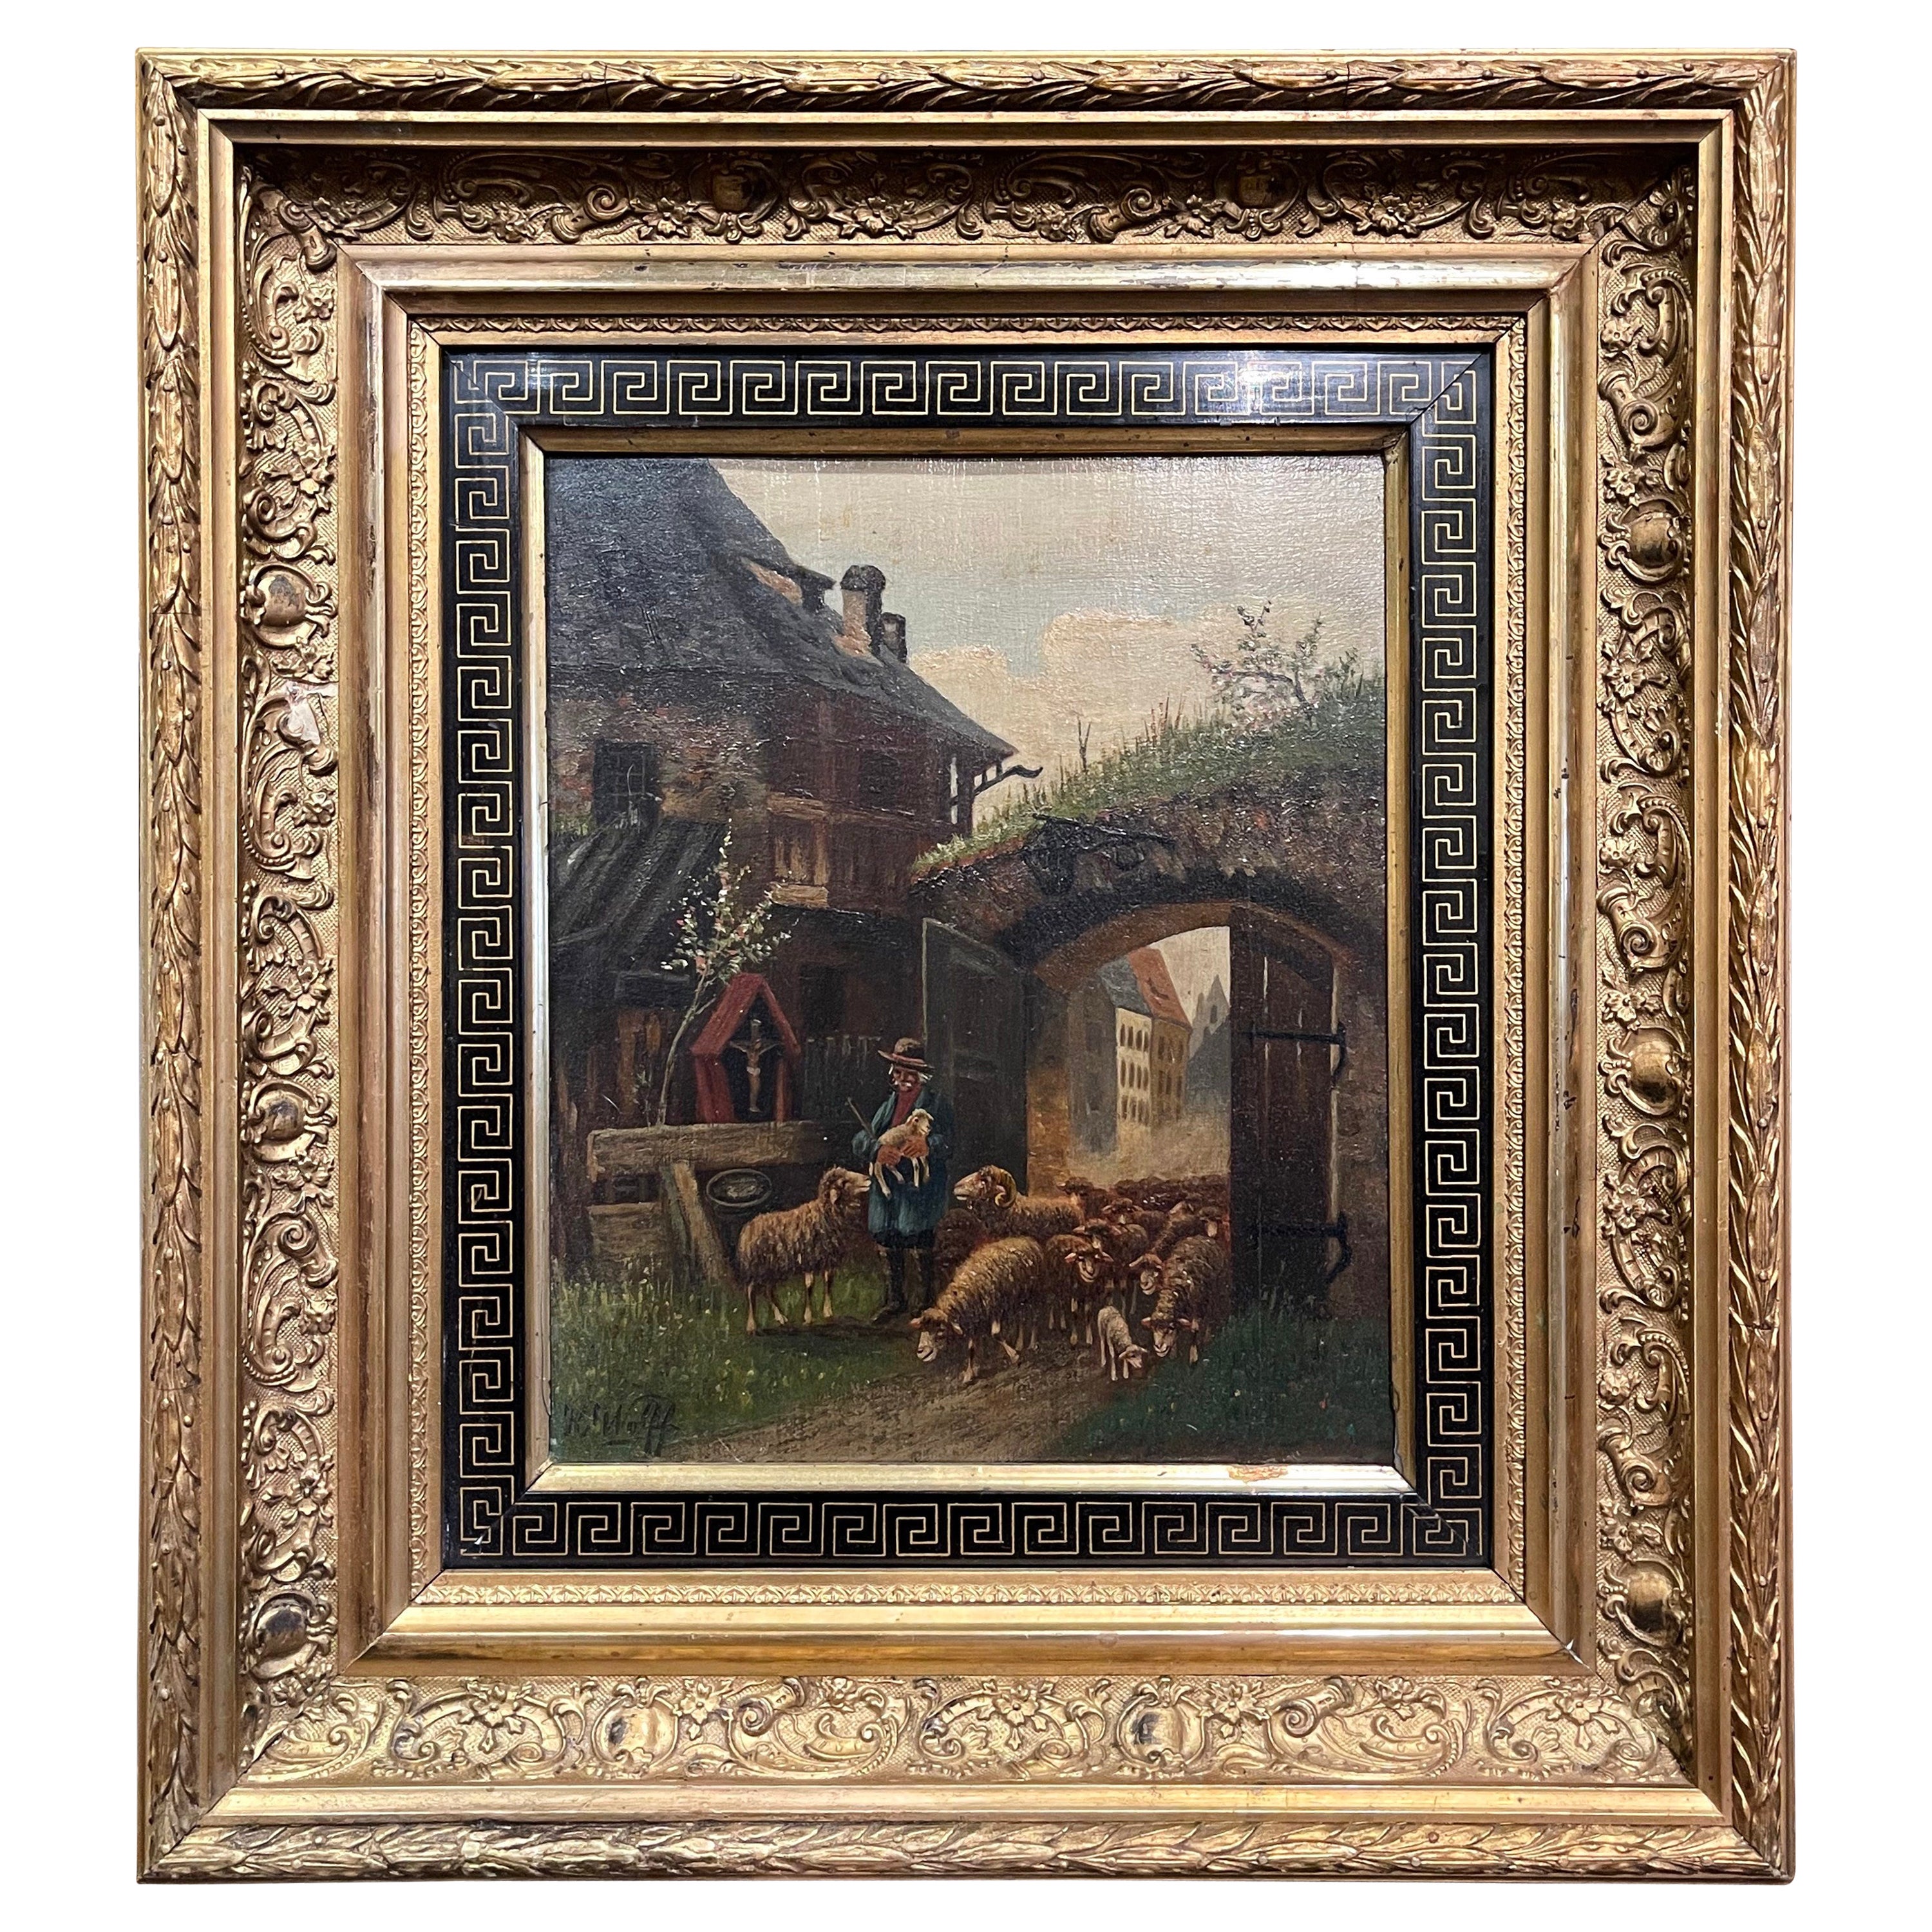 19th Century German Oil on Board Sheep Painting in Gilt Frame Signed H. Wolff